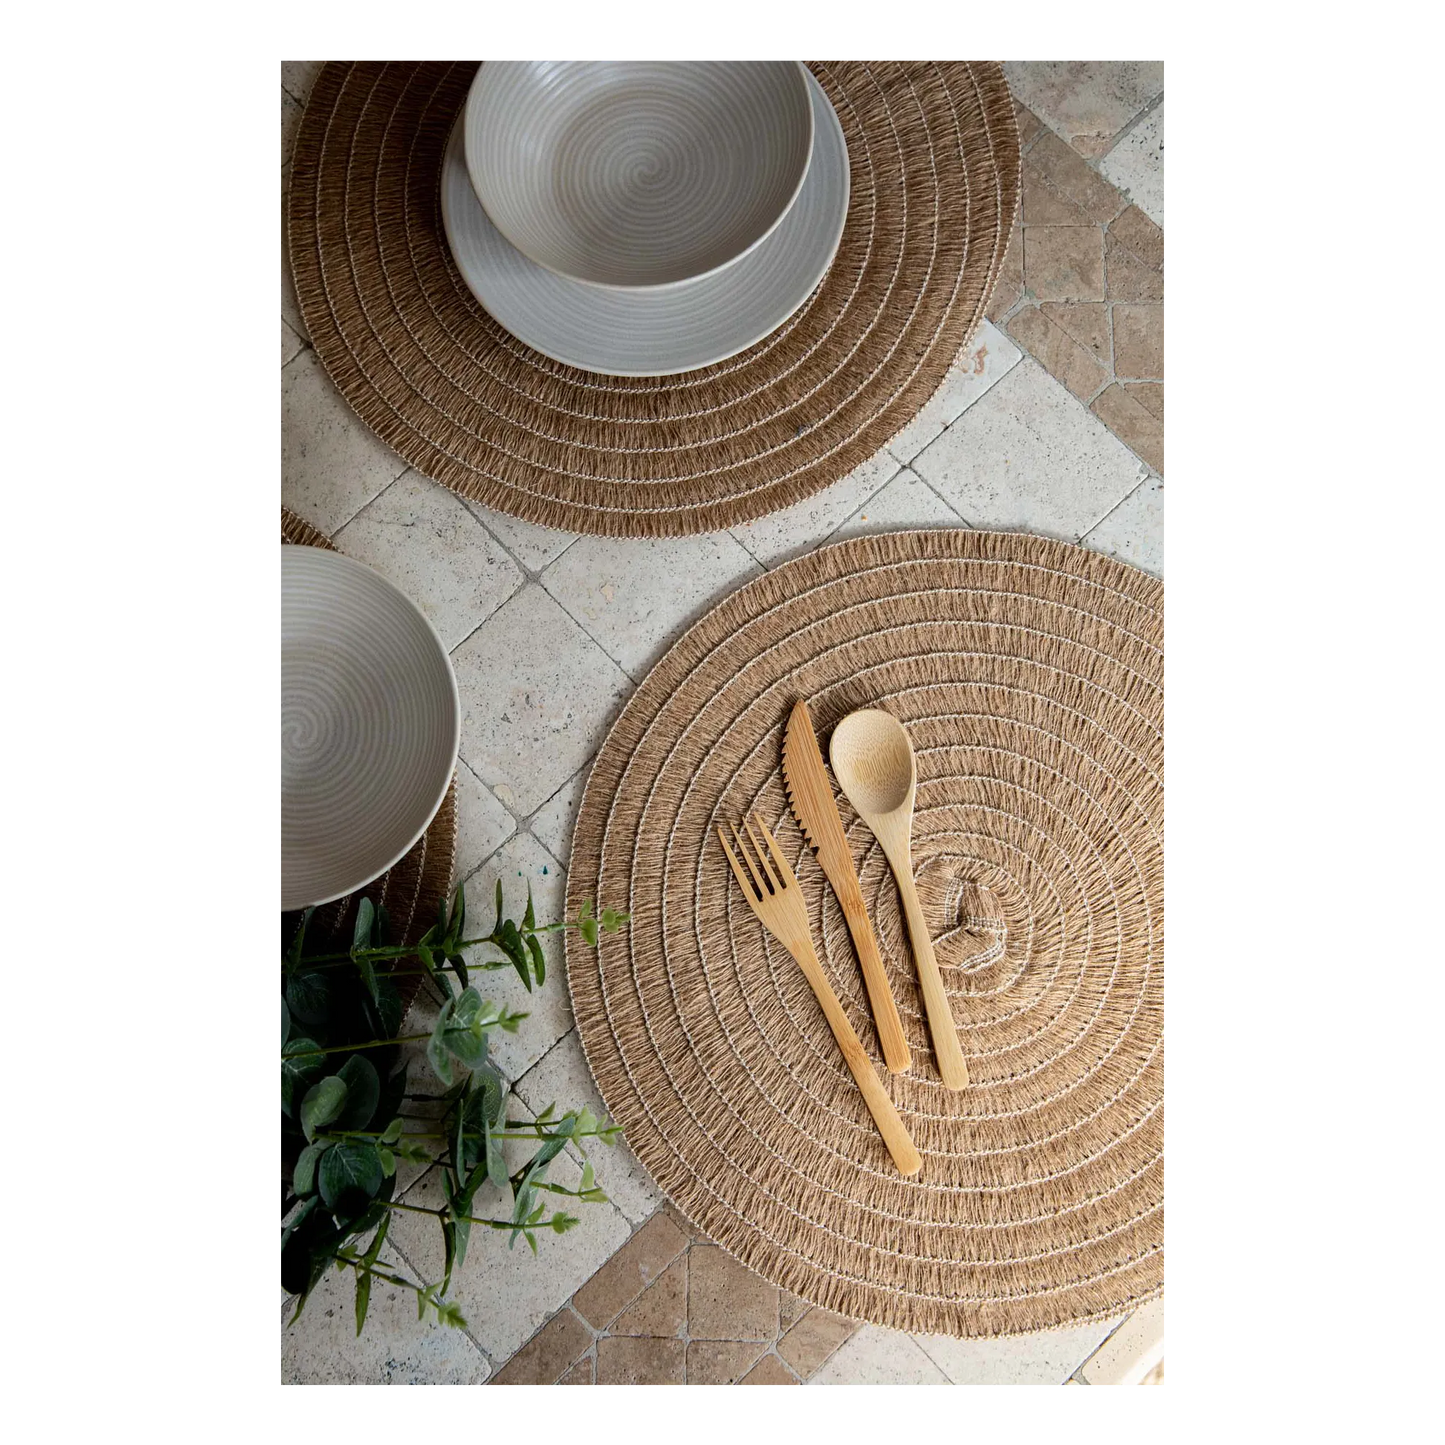 Set of 4 Jute Placemats, Natural Hessian Round Table Mats, 41cm